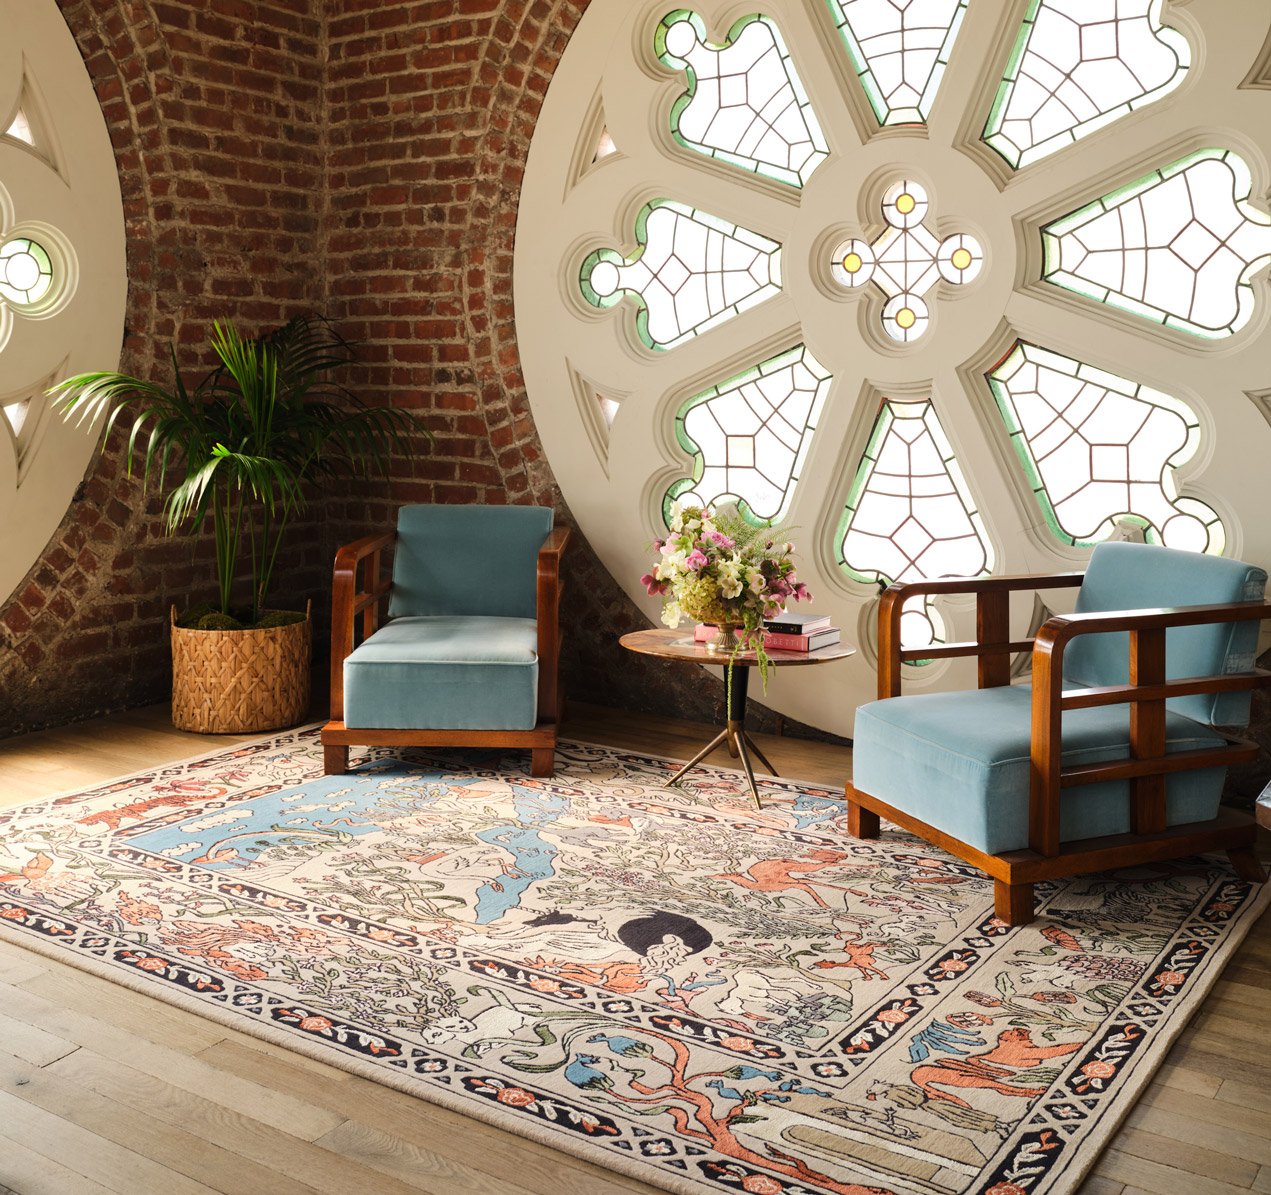 The Rug Company: Subscribe to our Newsletter